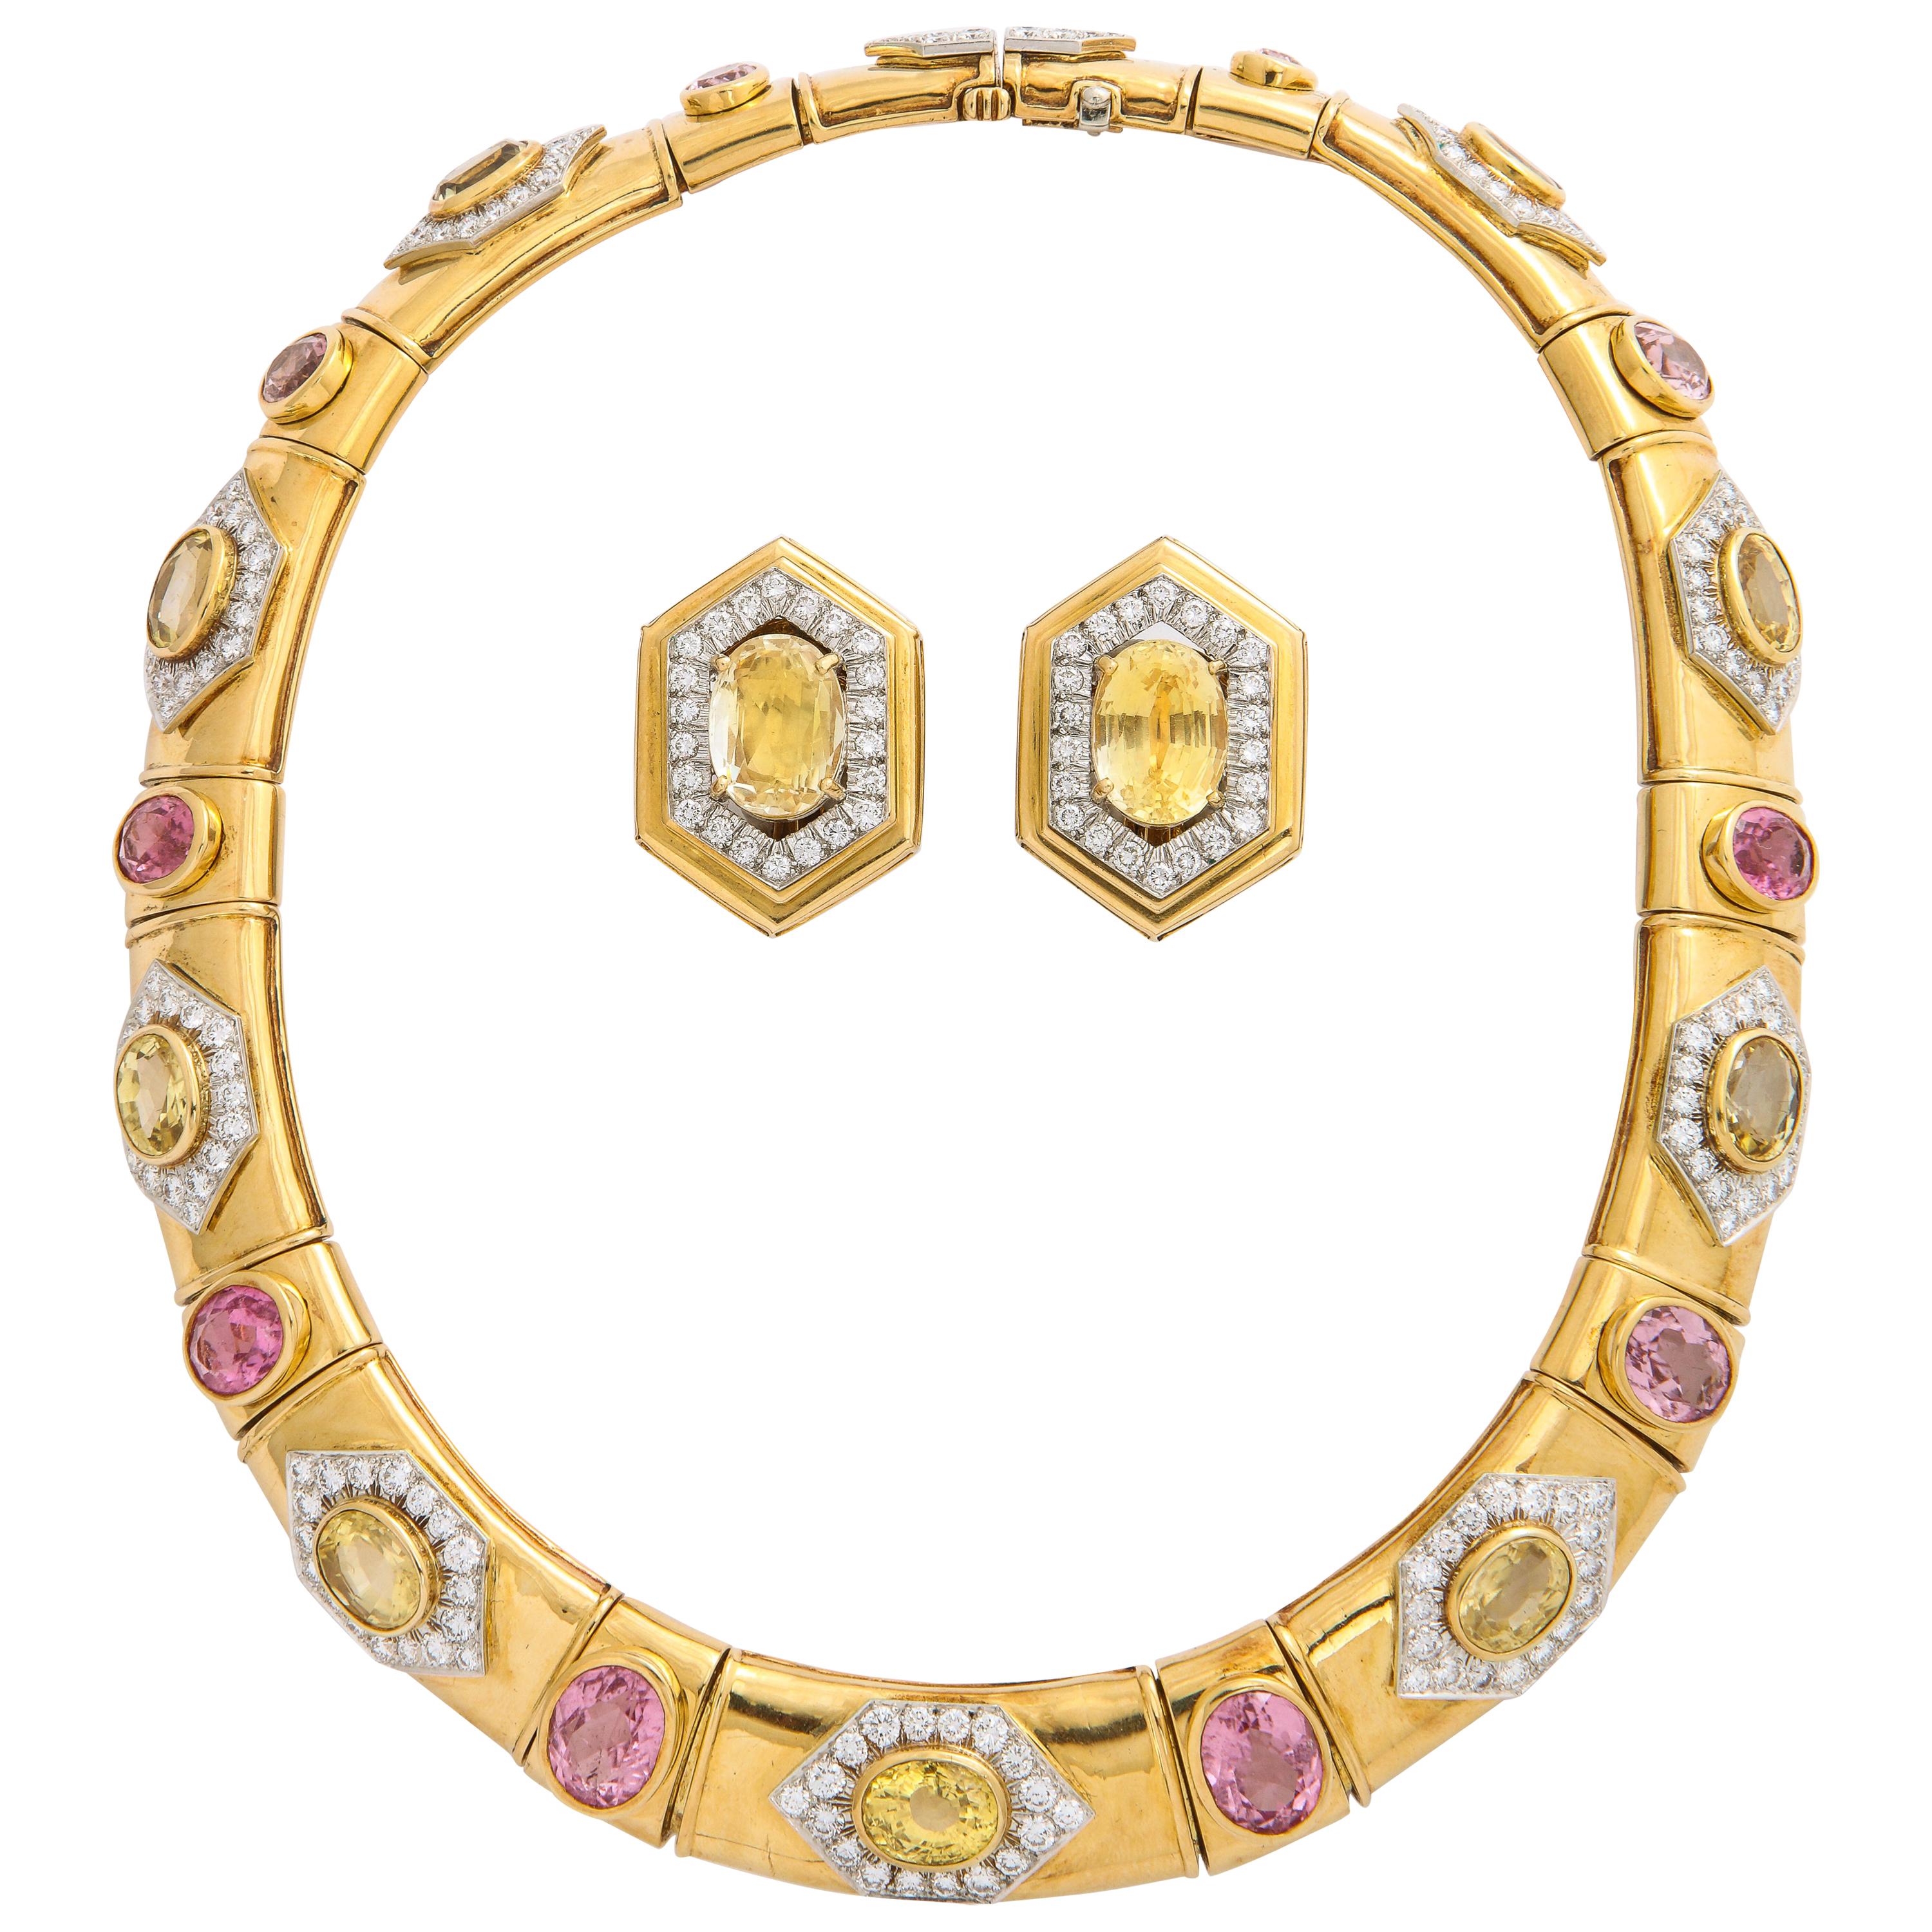 David Webb Magnificent Multi Sapphire Diamond Gold Necklace and Earrings Set